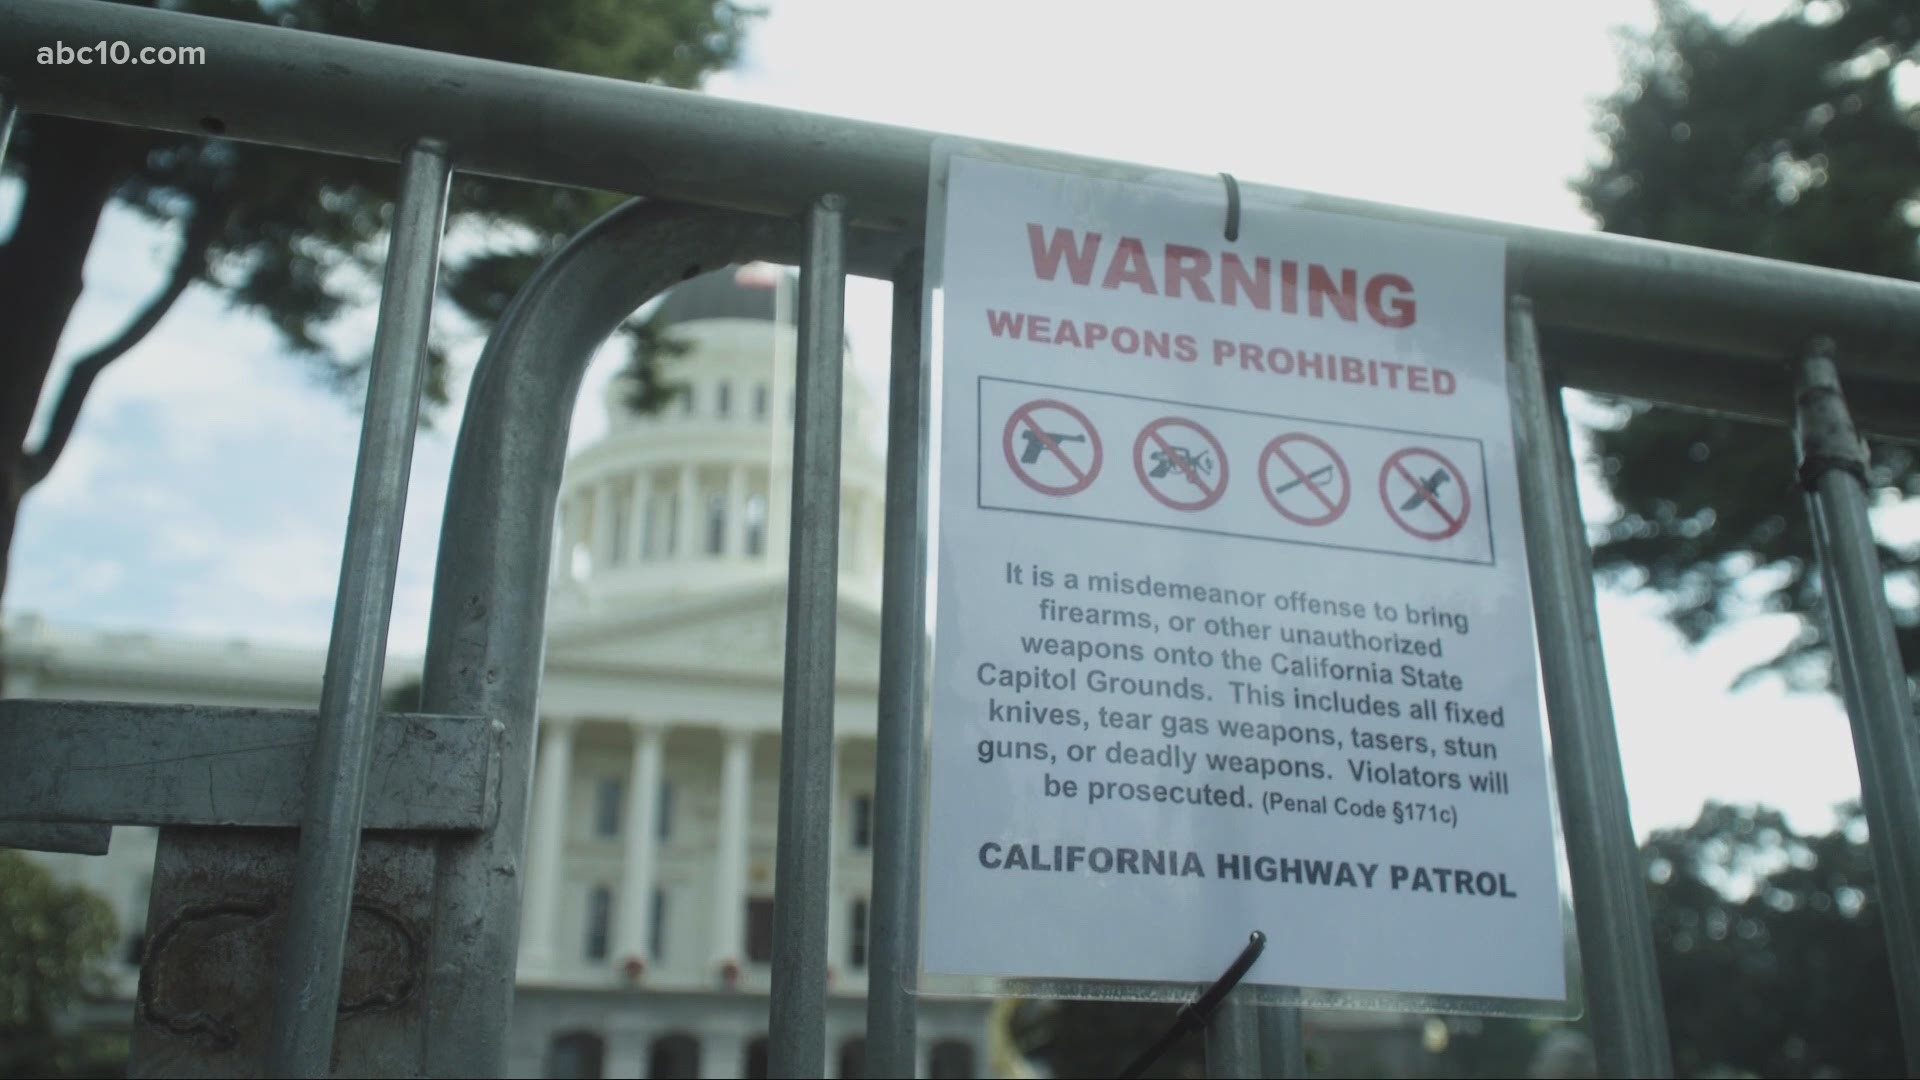 Sacramento law enforcement agencies are preparing for possible armed protests at the State Capitol, while some businesses are boarding up or shutting down.